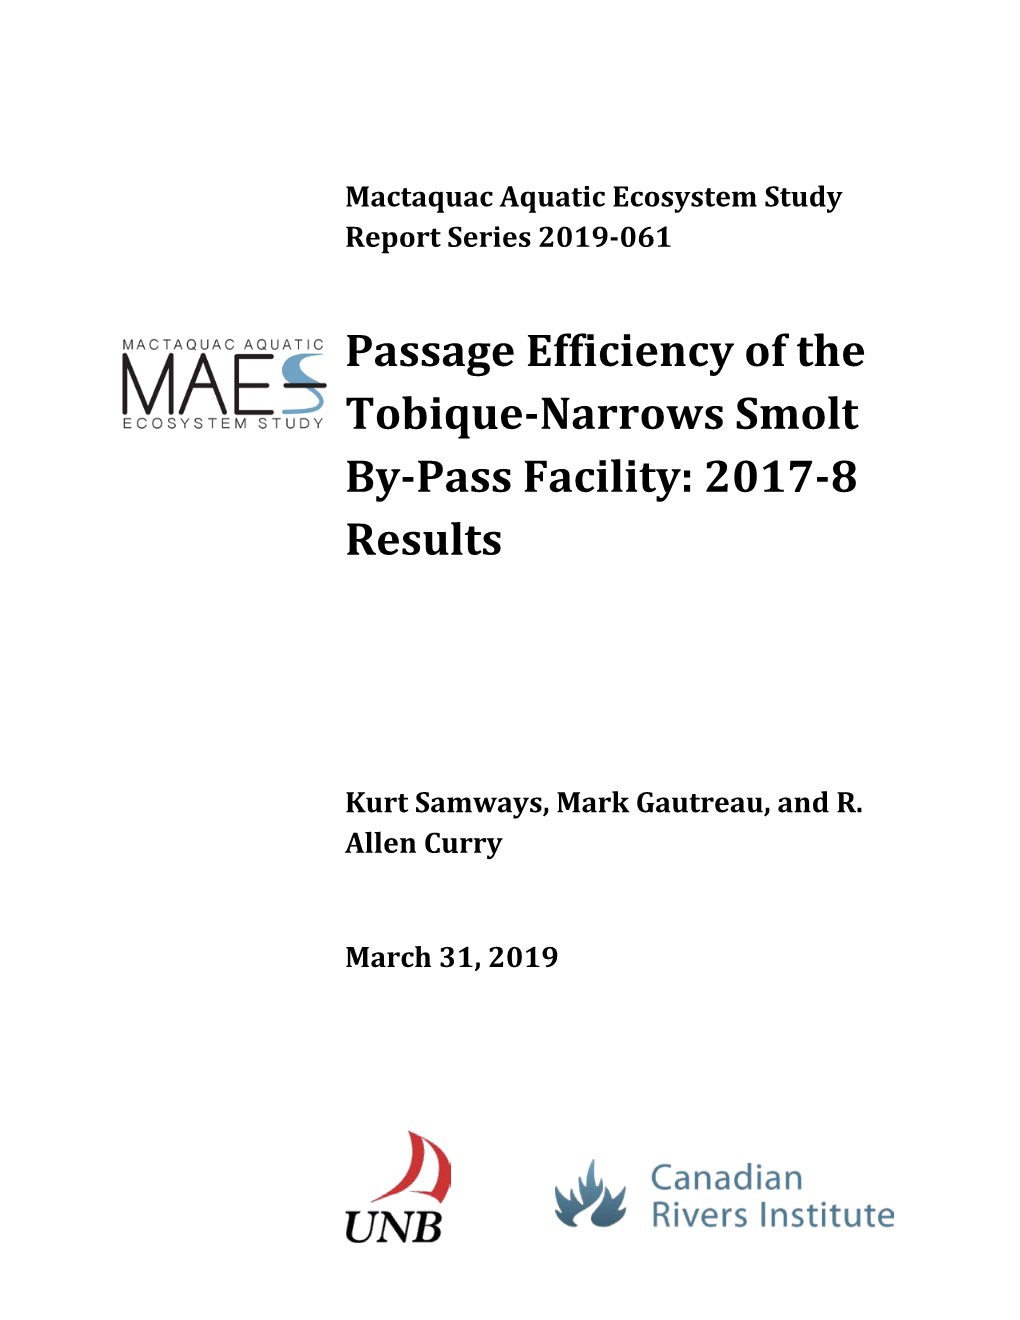 Passage Efficiency of the Tobique-Narrows Smolt By-Pass Facility: 2017-8 Results